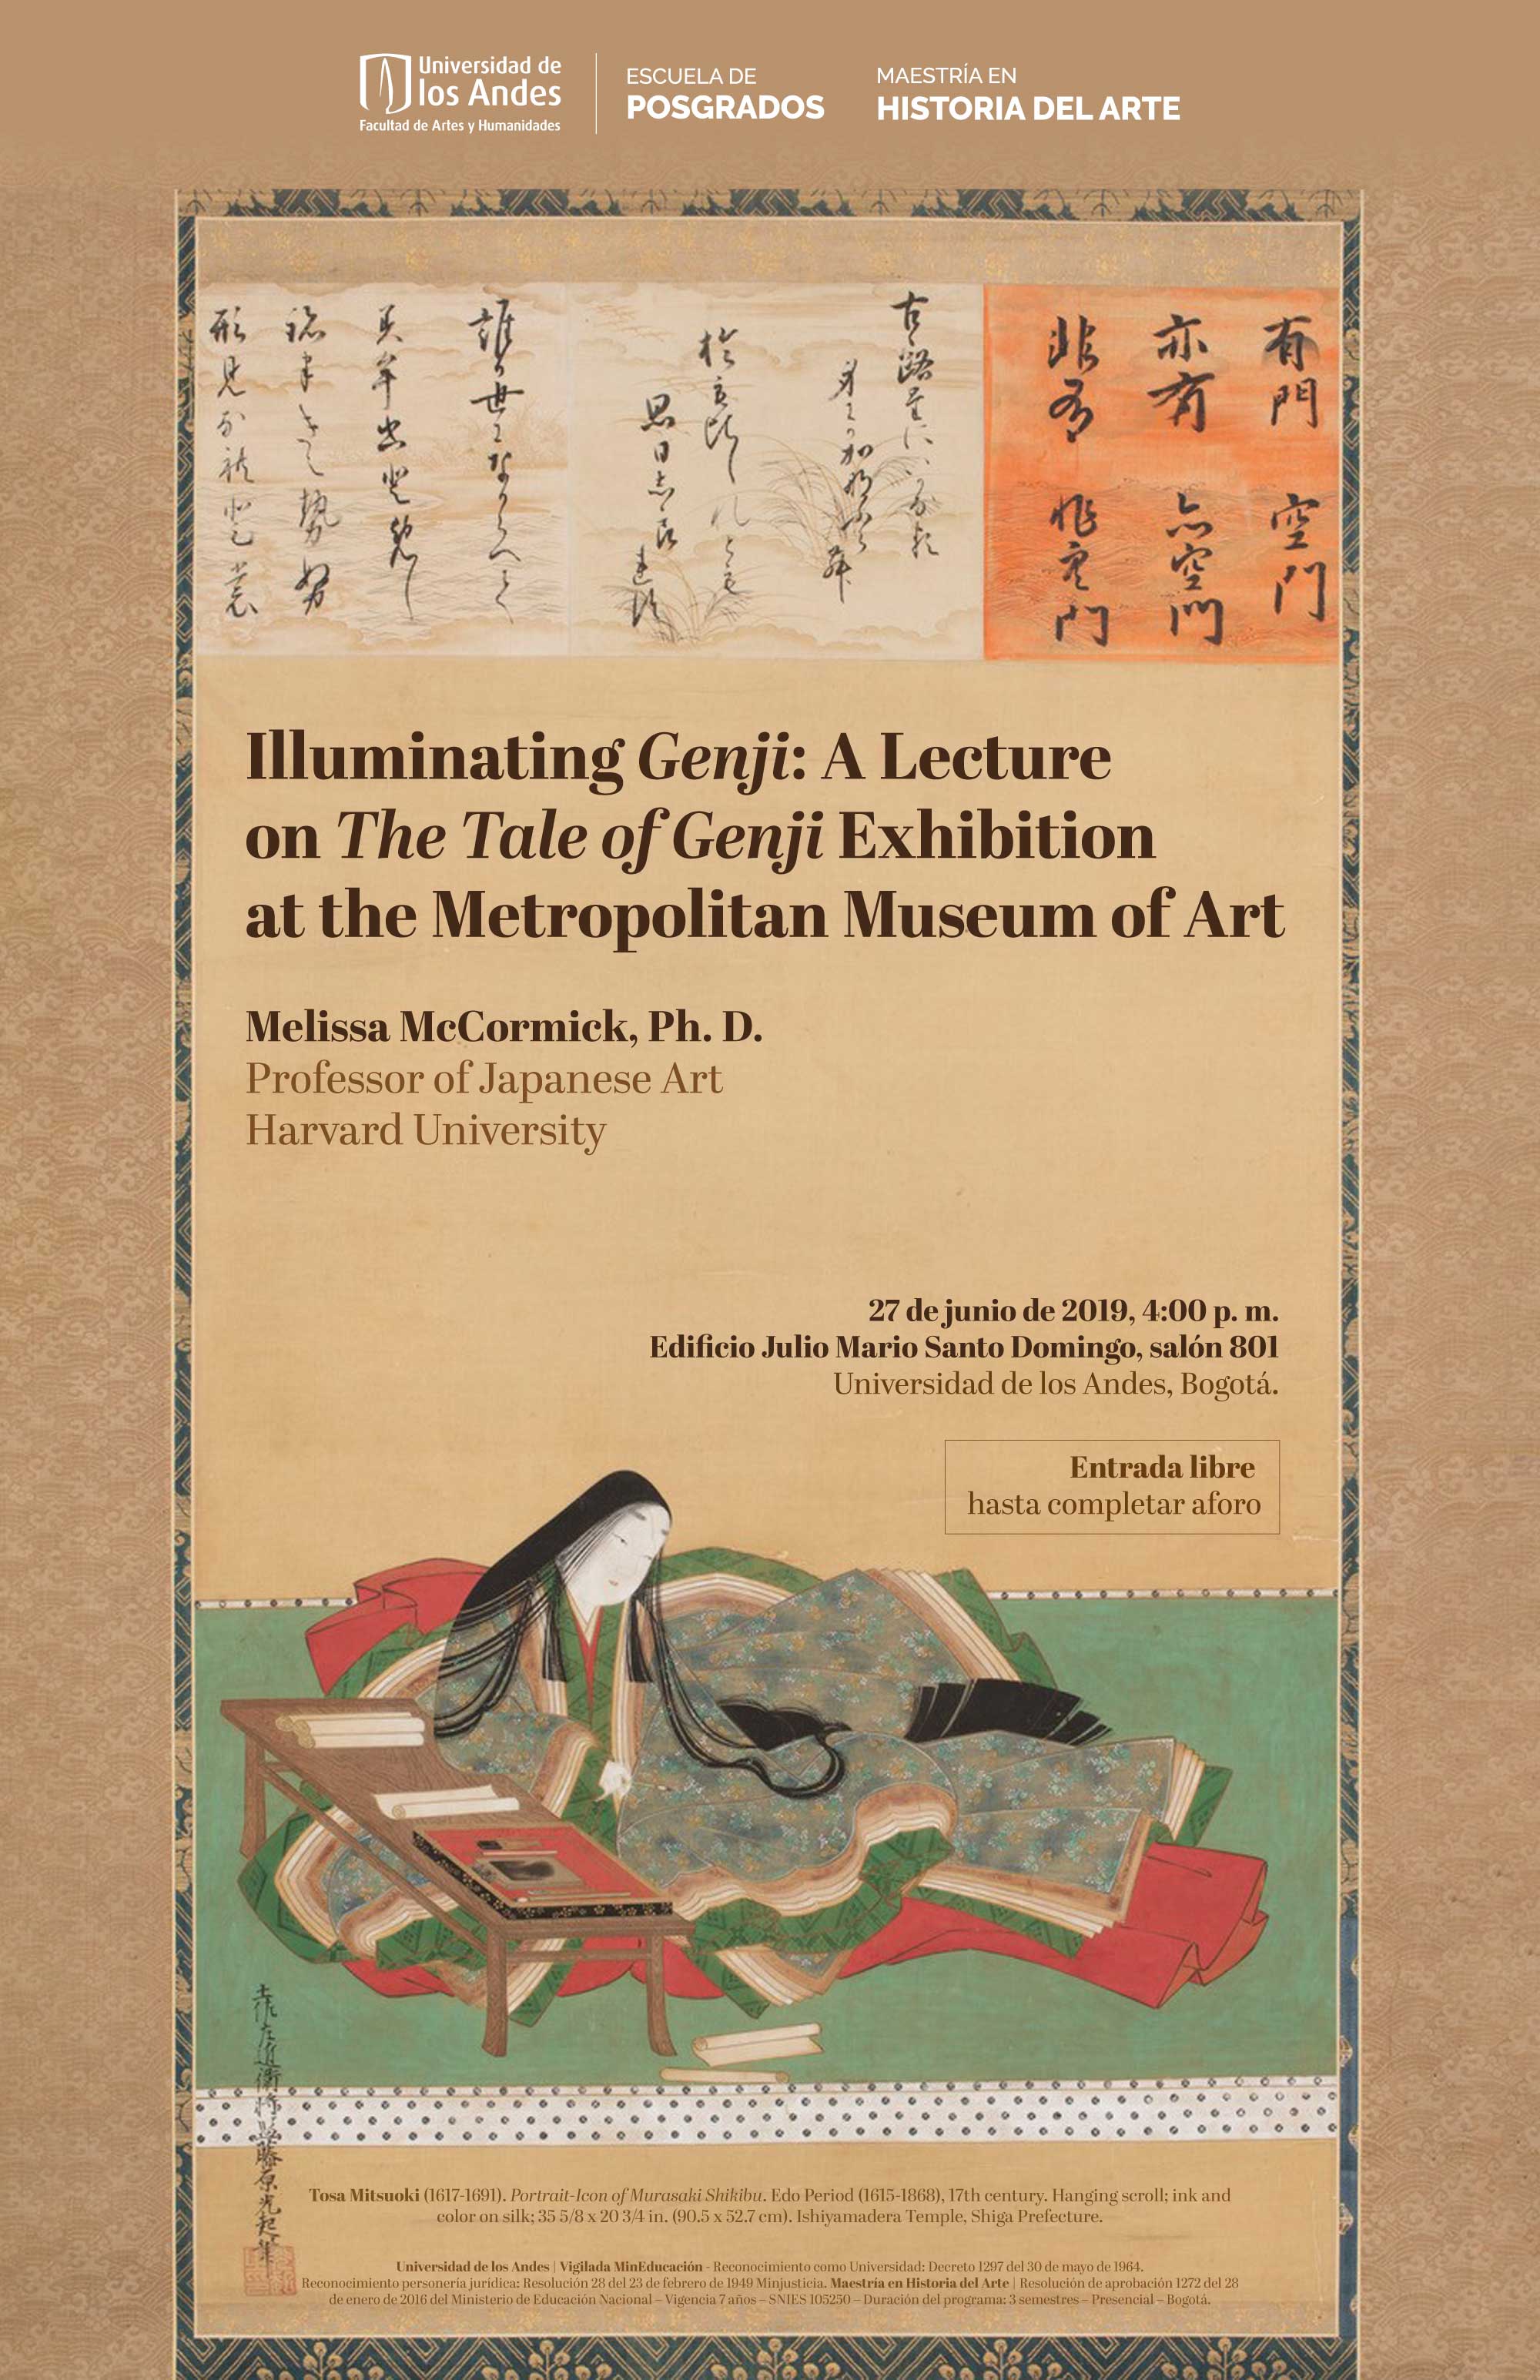 Charla – Illuminating Genji: A Lecture on The Tale of Genji Exhibition at the Metropolitan Museum of Art